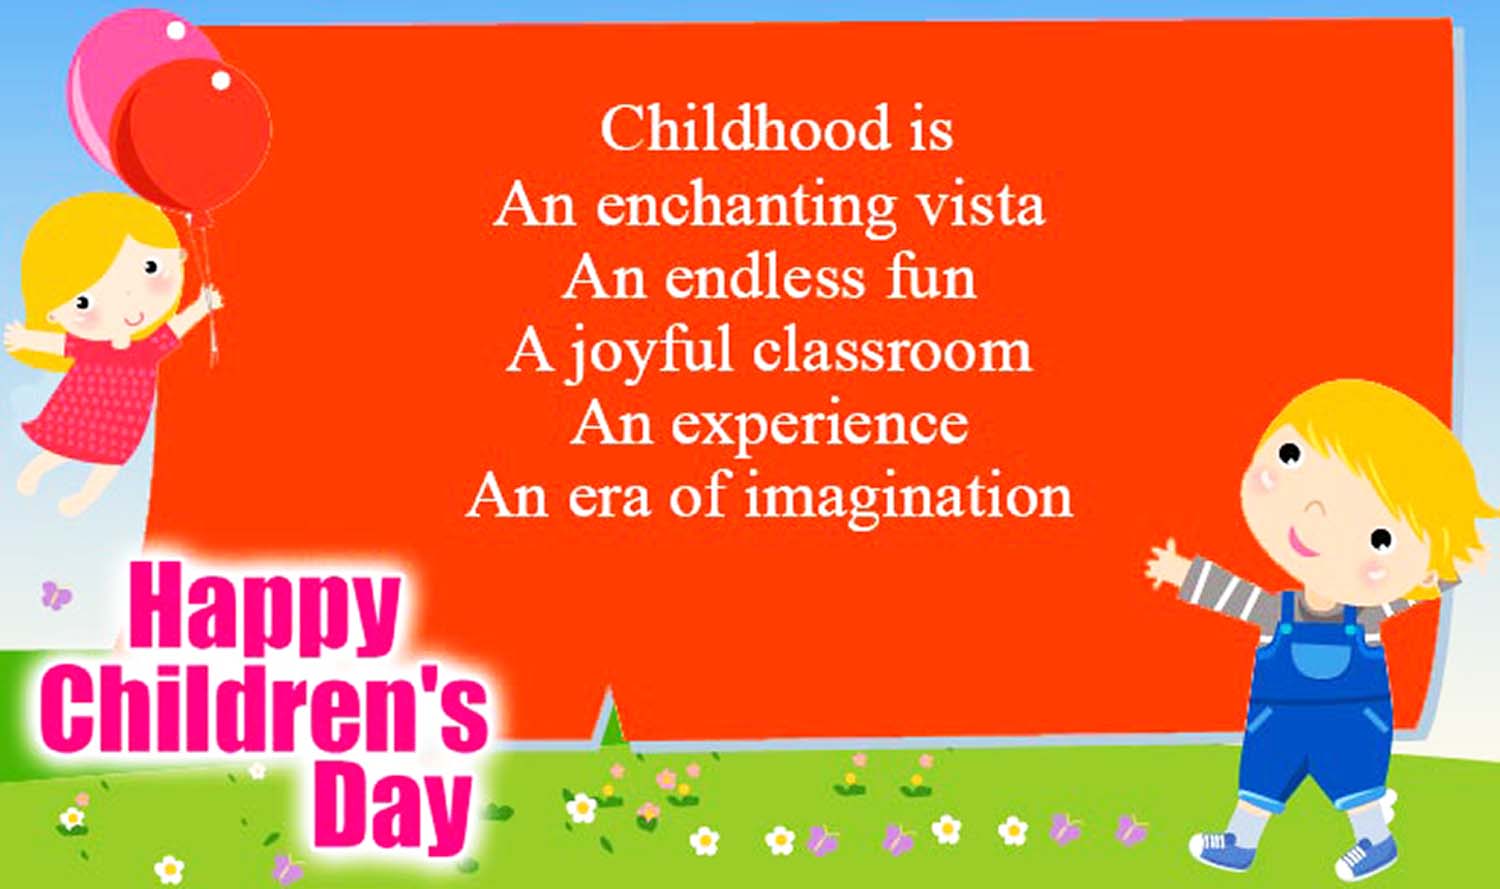 children's day images and quotes 